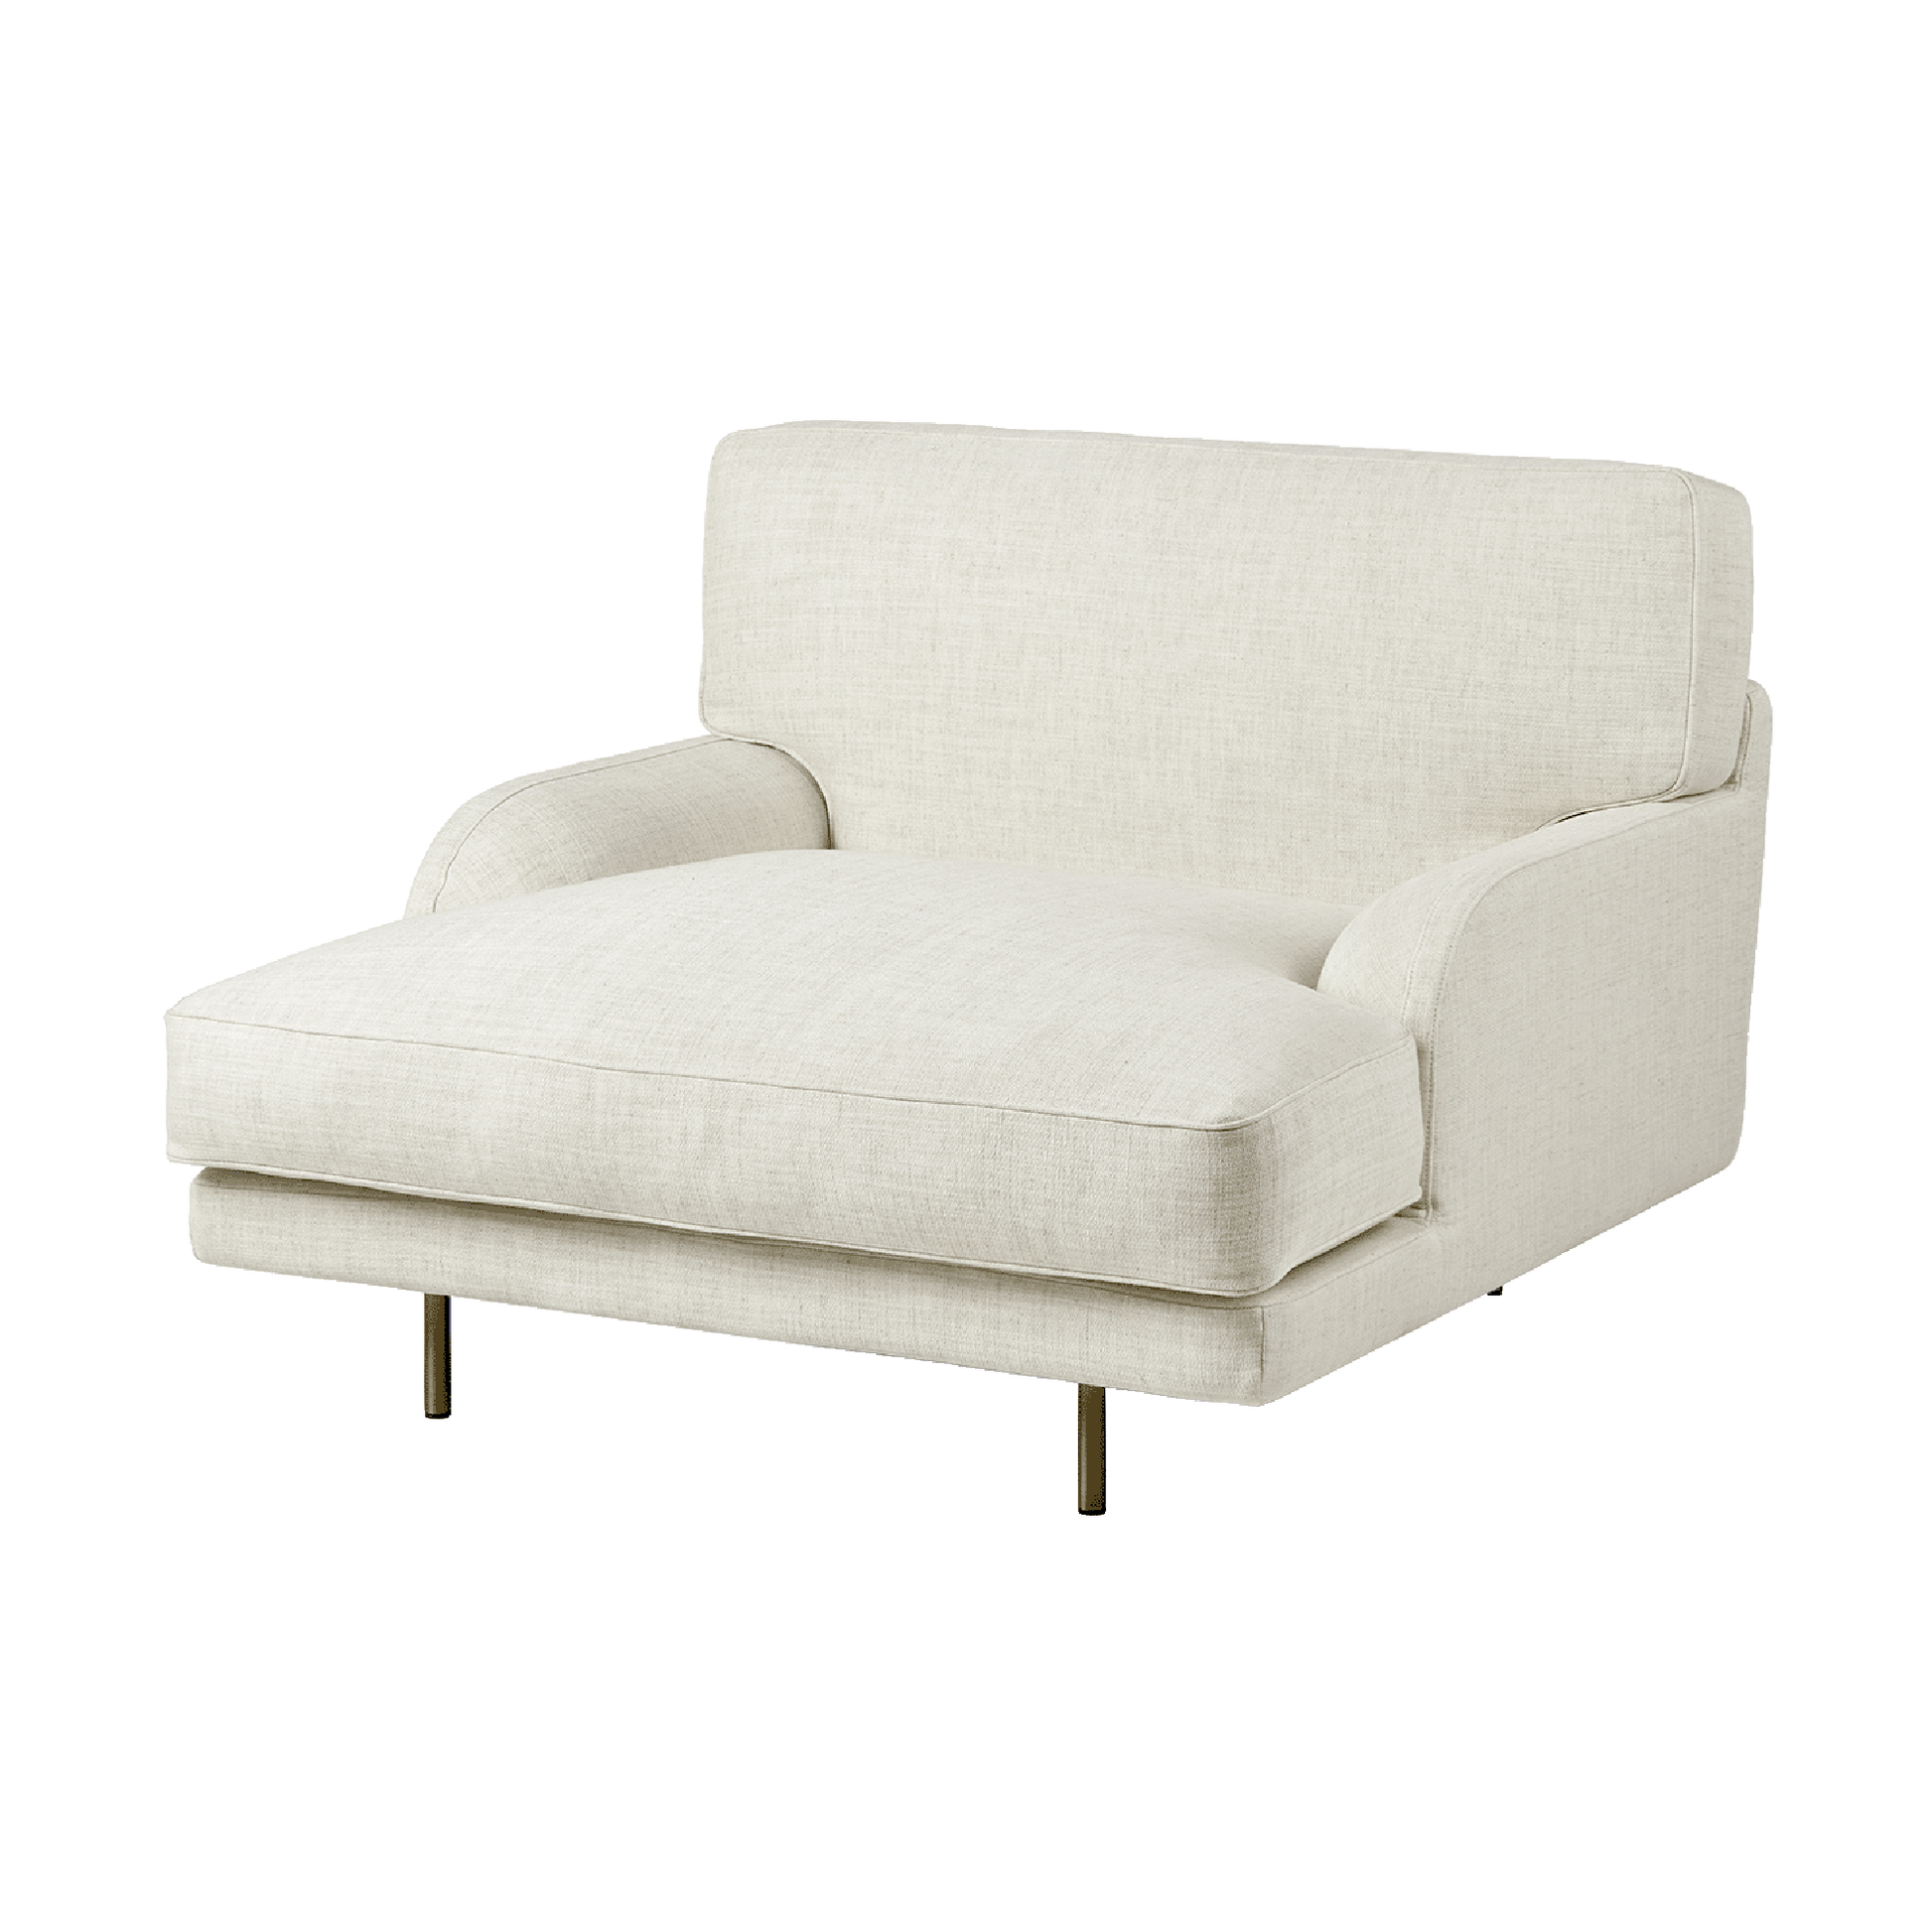 Flaneur Armchair by GUBI #Upholstered in Indianskop 15 with Legs in Antique Brass